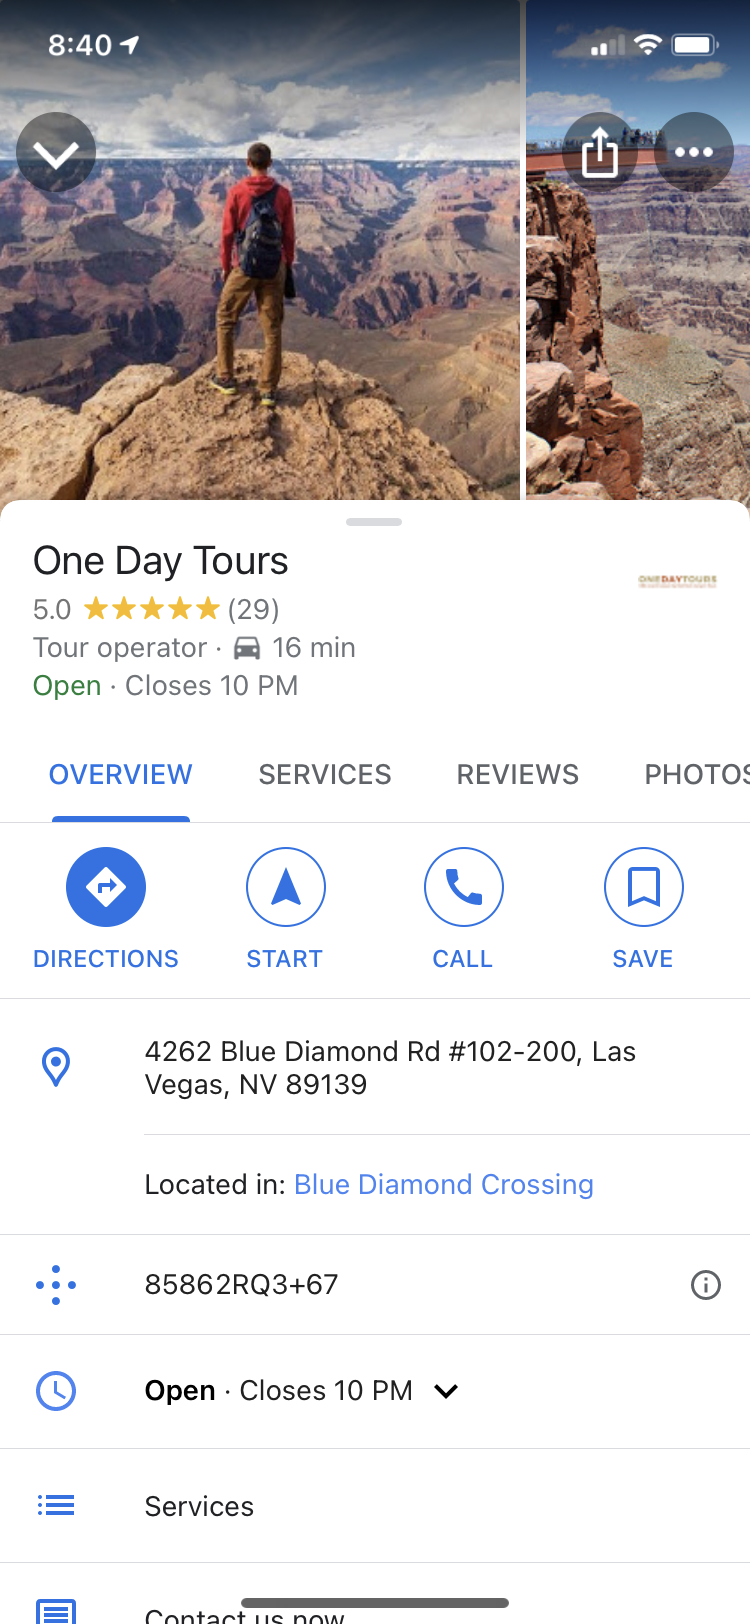 The One Day Tours GMB listing on mobile